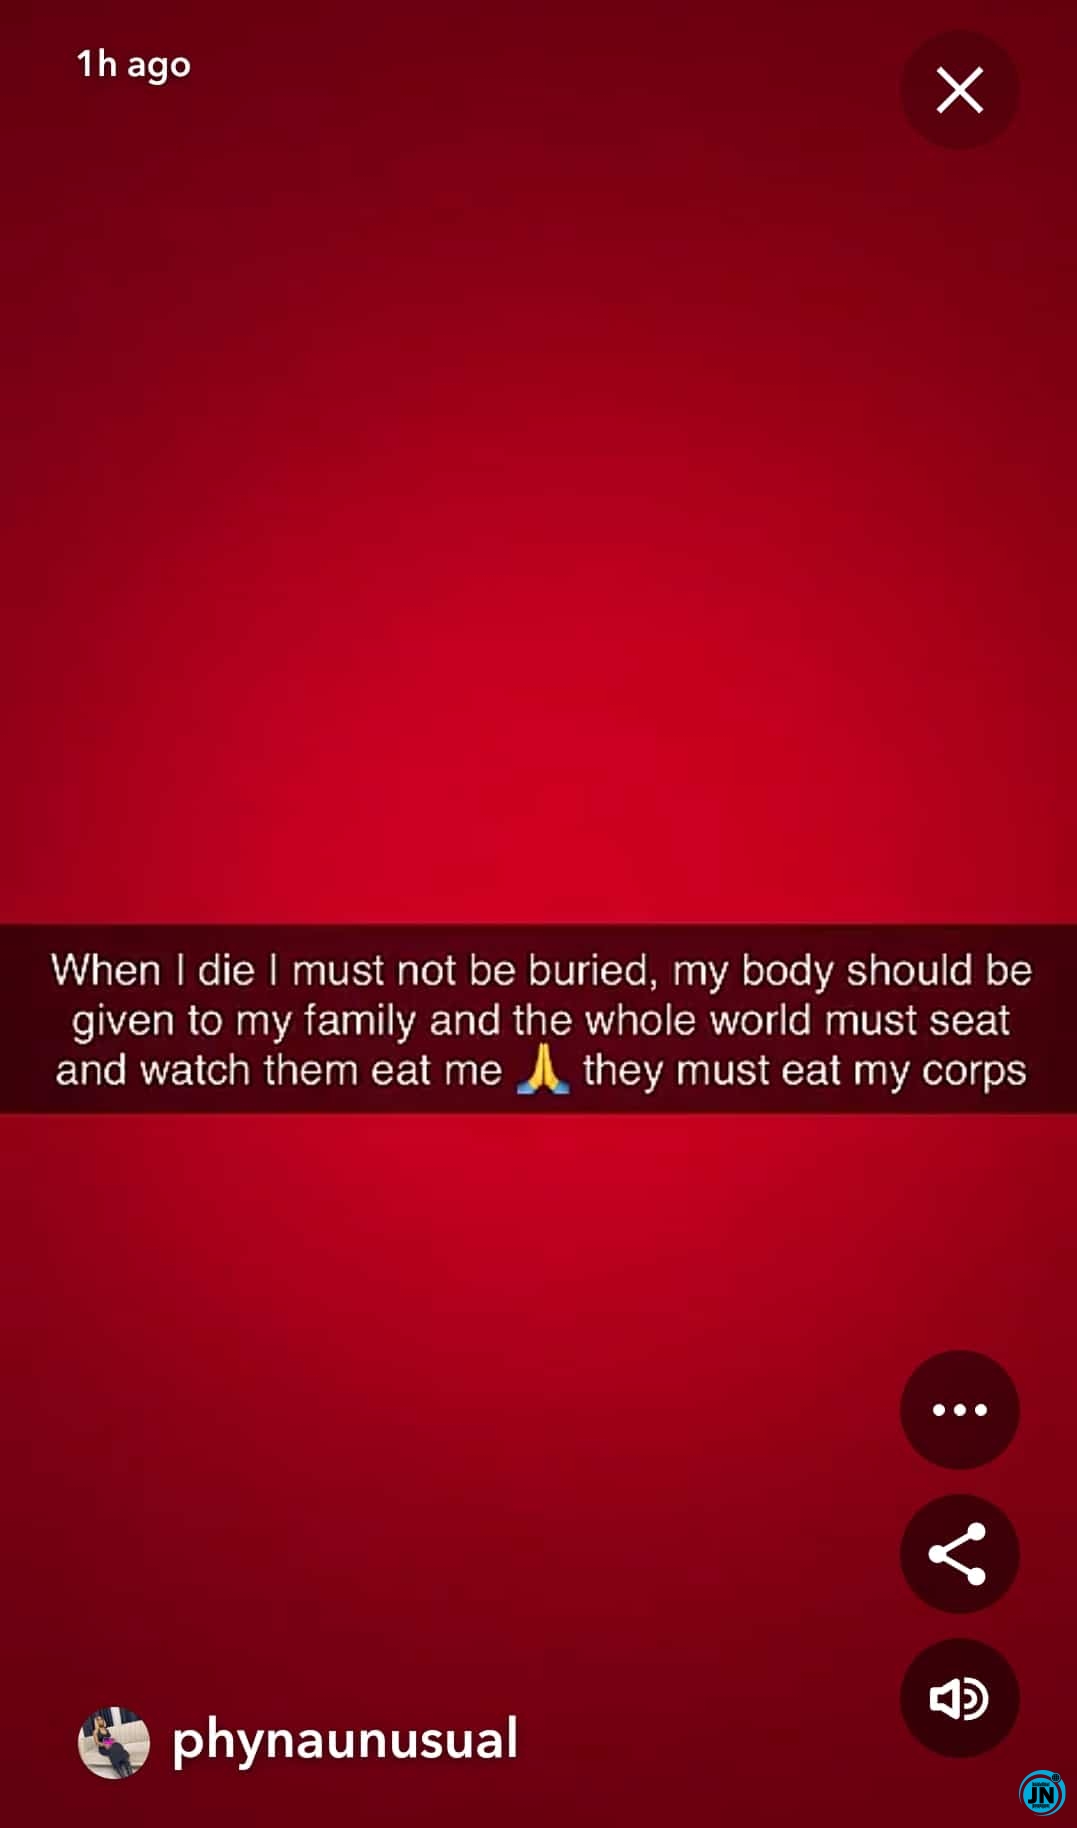 Phyna writеs a cryptic post stating that hеr body shouldn't bе buriеd aftеr hеr dеath, but rathеr, hеr family should consumе hеr corpsе